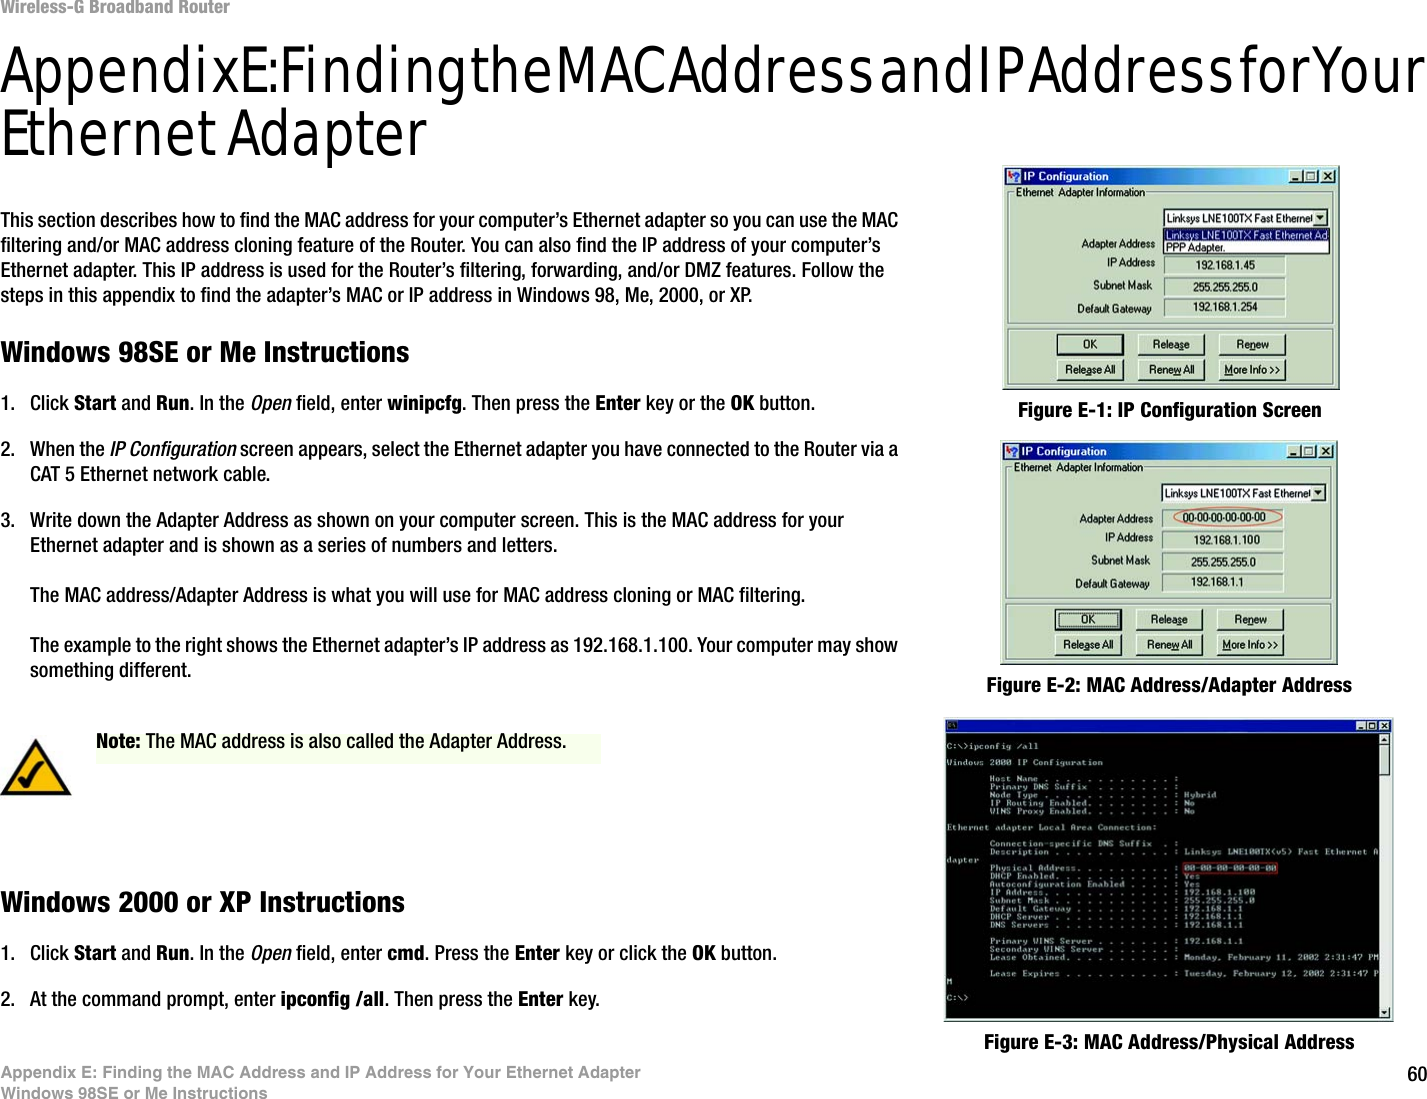 60Appendix E: Finding the MAC Address and IP Address for Your Ethernet AdapterWindows 98SE or Me InstructionsWireless-G Broadband RouterAppendix E: Finding the MAC Address and IP Address for Your Ethernet AdapterThis section describes how to find the MAC address for your computer’s Ethernet adapter so you can use the MAC filtering and/or MAC address cloning feature of the Router. You can also find the IP address of your computer’s Ethernet adapter. This IP address is used for the Router’s filtering, forwarding, and/or DMZ features. Follow the steps in this appendix to find the adapter’s MAC or IP address in Windows 98, Me, 2000, or XP.Windows 98SE or Me Instructions1. Click Start and Run. In the Open field, enter winipcfg. Then press the Enter key or the OK button. 2. When the IP Configuration screen appears, select the Ethernet adapter you have connected to the Router via a CAT 5 Ethernet network cable. 3. Write down the Adapter Address as shown on your computer screen. This is the MAC address for your Ethernet adapter and is shown as a series of numbers and letters.The MAC address/Adapter Address is what you will use for MAC address cloning or MAC filtering.The example to the right shows the Ethernet adapter’s IP address as 192.168.1.100. Your computer may show something different.Windows 2000 or XP Instructions1. Click Start and Run. In the Open field, enter cmd. Press the Enter key or click the OK button.2. At the command prompt, enter ipconfig /all. Then press the Enter key.Figure E-2: MAC Address/Adapter AddressFigure E-1: IP Configuration ScreenNote: The MAC address is also called the Adapter Address.Figure E-3: MAC Address/Physical Address